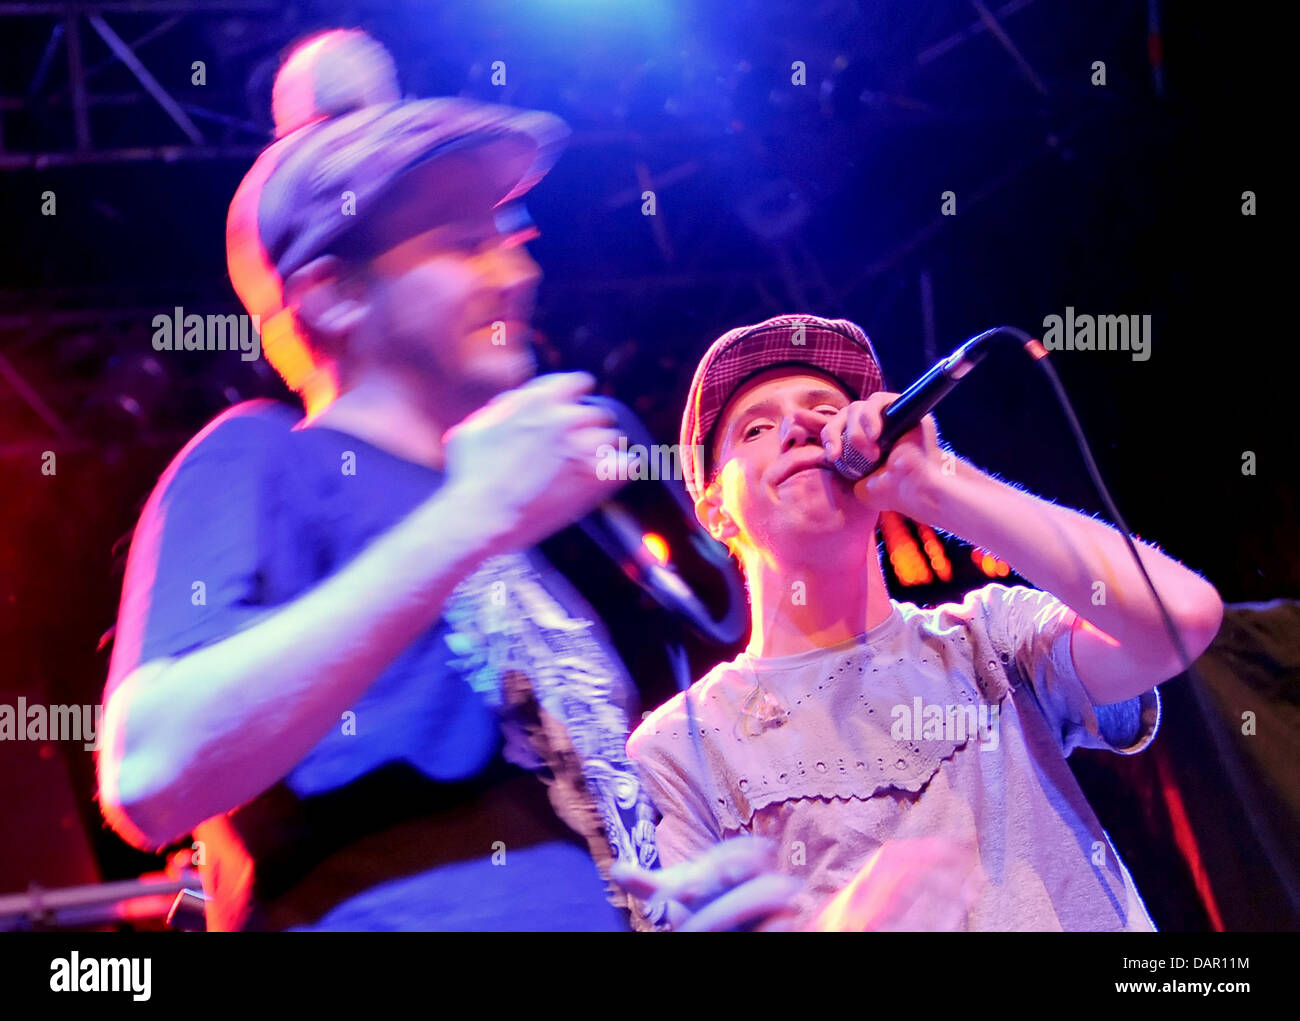 Finnish beatboxer and vocal percussionist Felix Zenger (R), performs on stage at the Kesselhaus concert venue during the Berlin Music Week - 'Your voice against poverty' in Berlin, Germany, 7 September 2011. Musicians from around the world are showcaing their musical talents in small, off-stage performances. Photo: Britta Pedersen Stock Photo